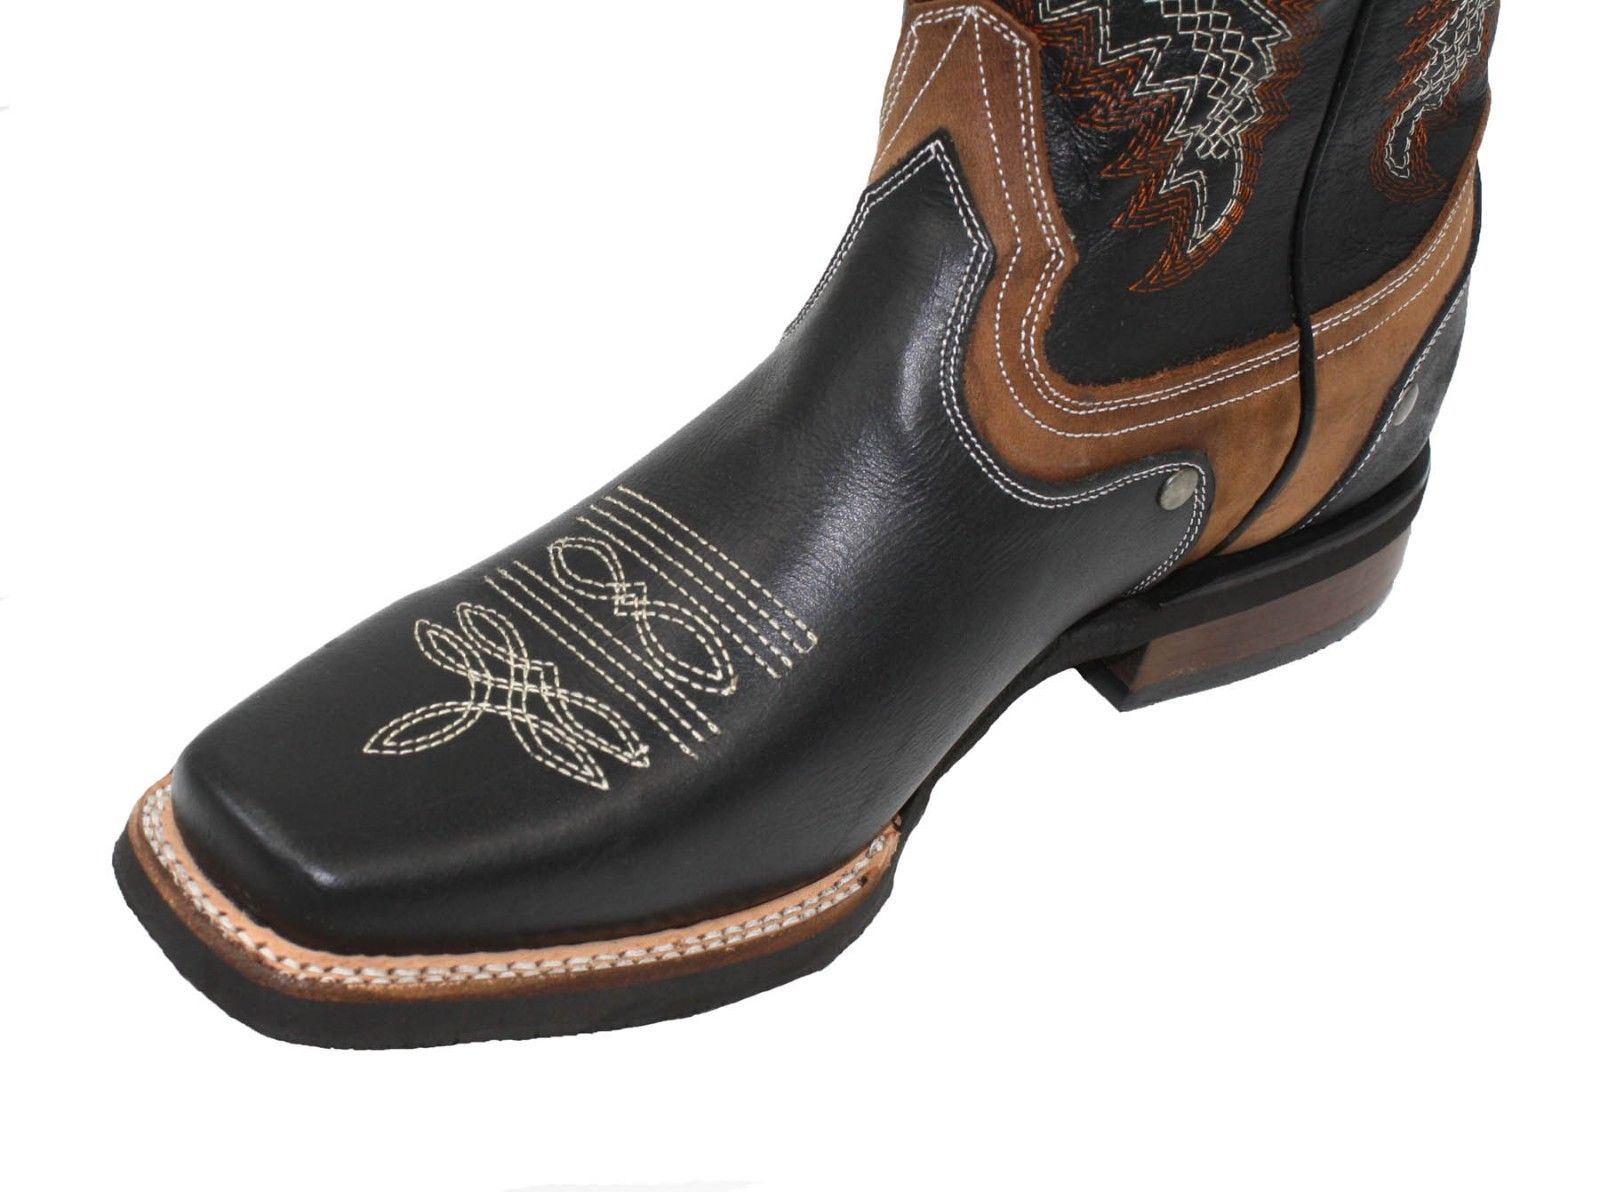 MEN'S RODEO COWBOY BOOTS GENUINE LEATHER WESTERN SQUARE TOE LUXURY BOOTS 